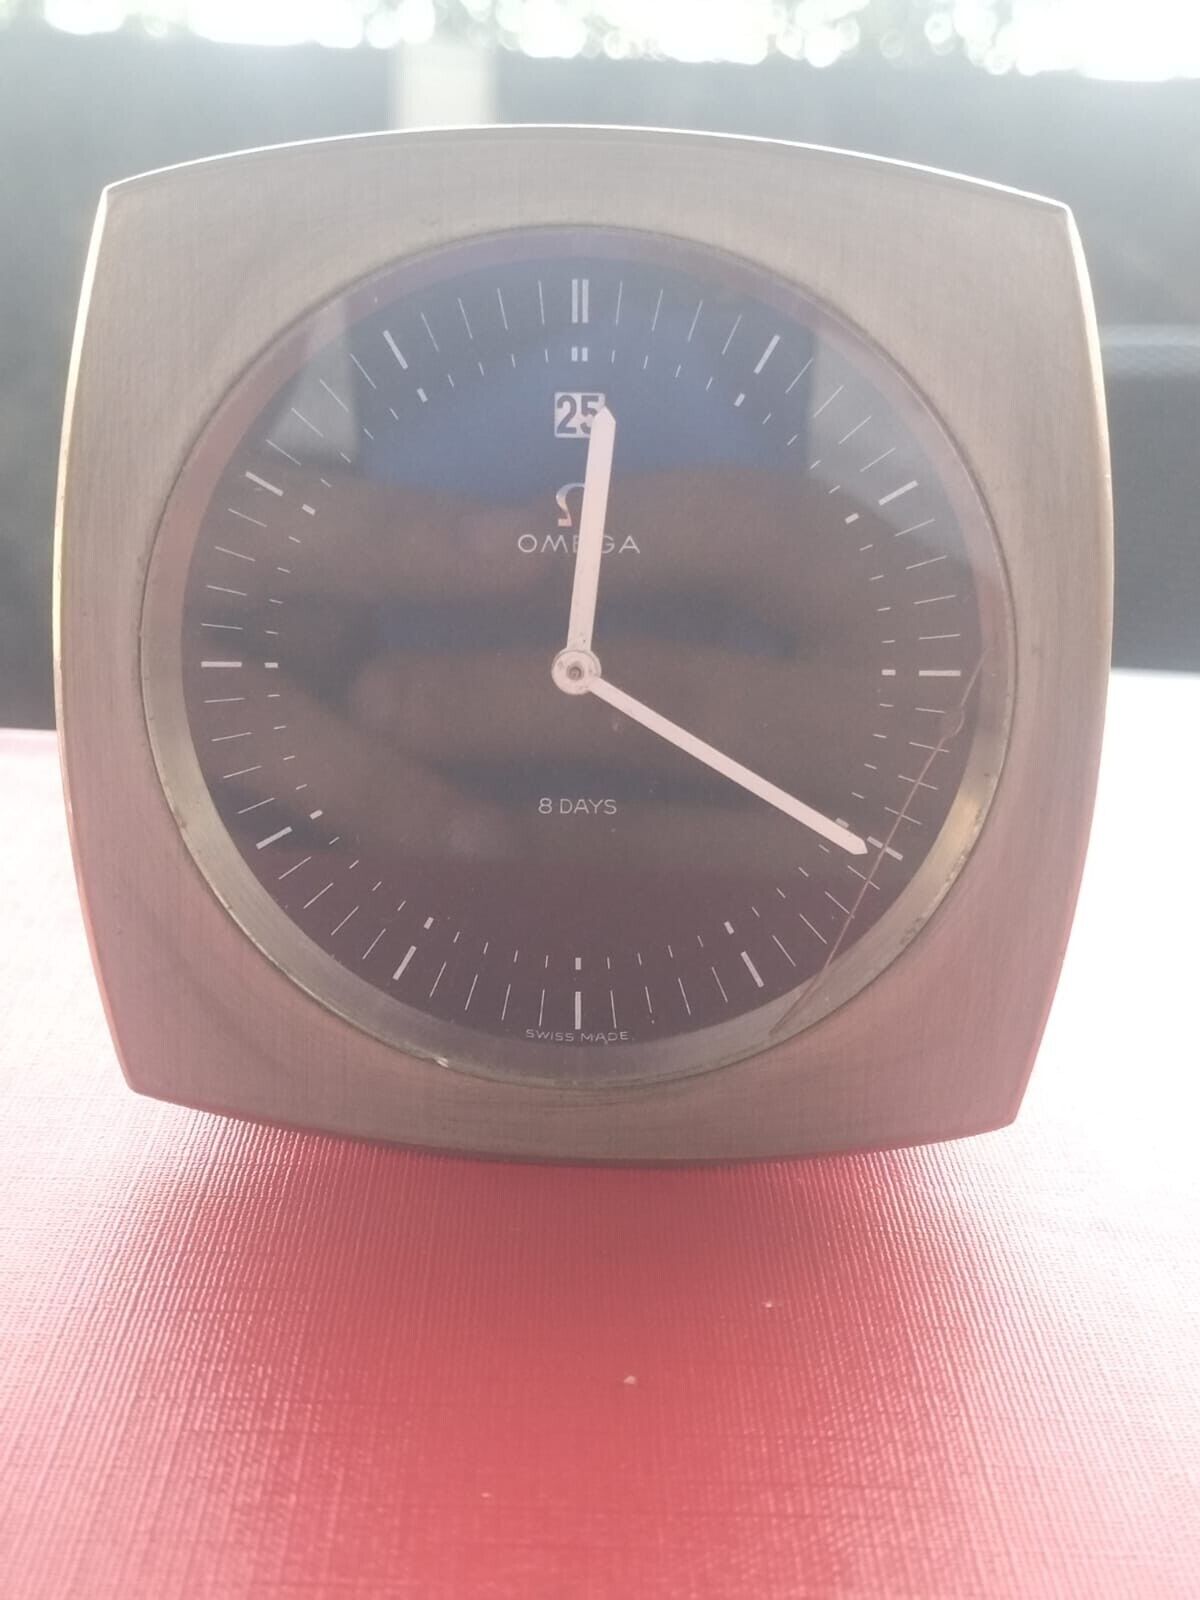 Extremly Rare Omega Desk Clock 8 Days NOT WORKING